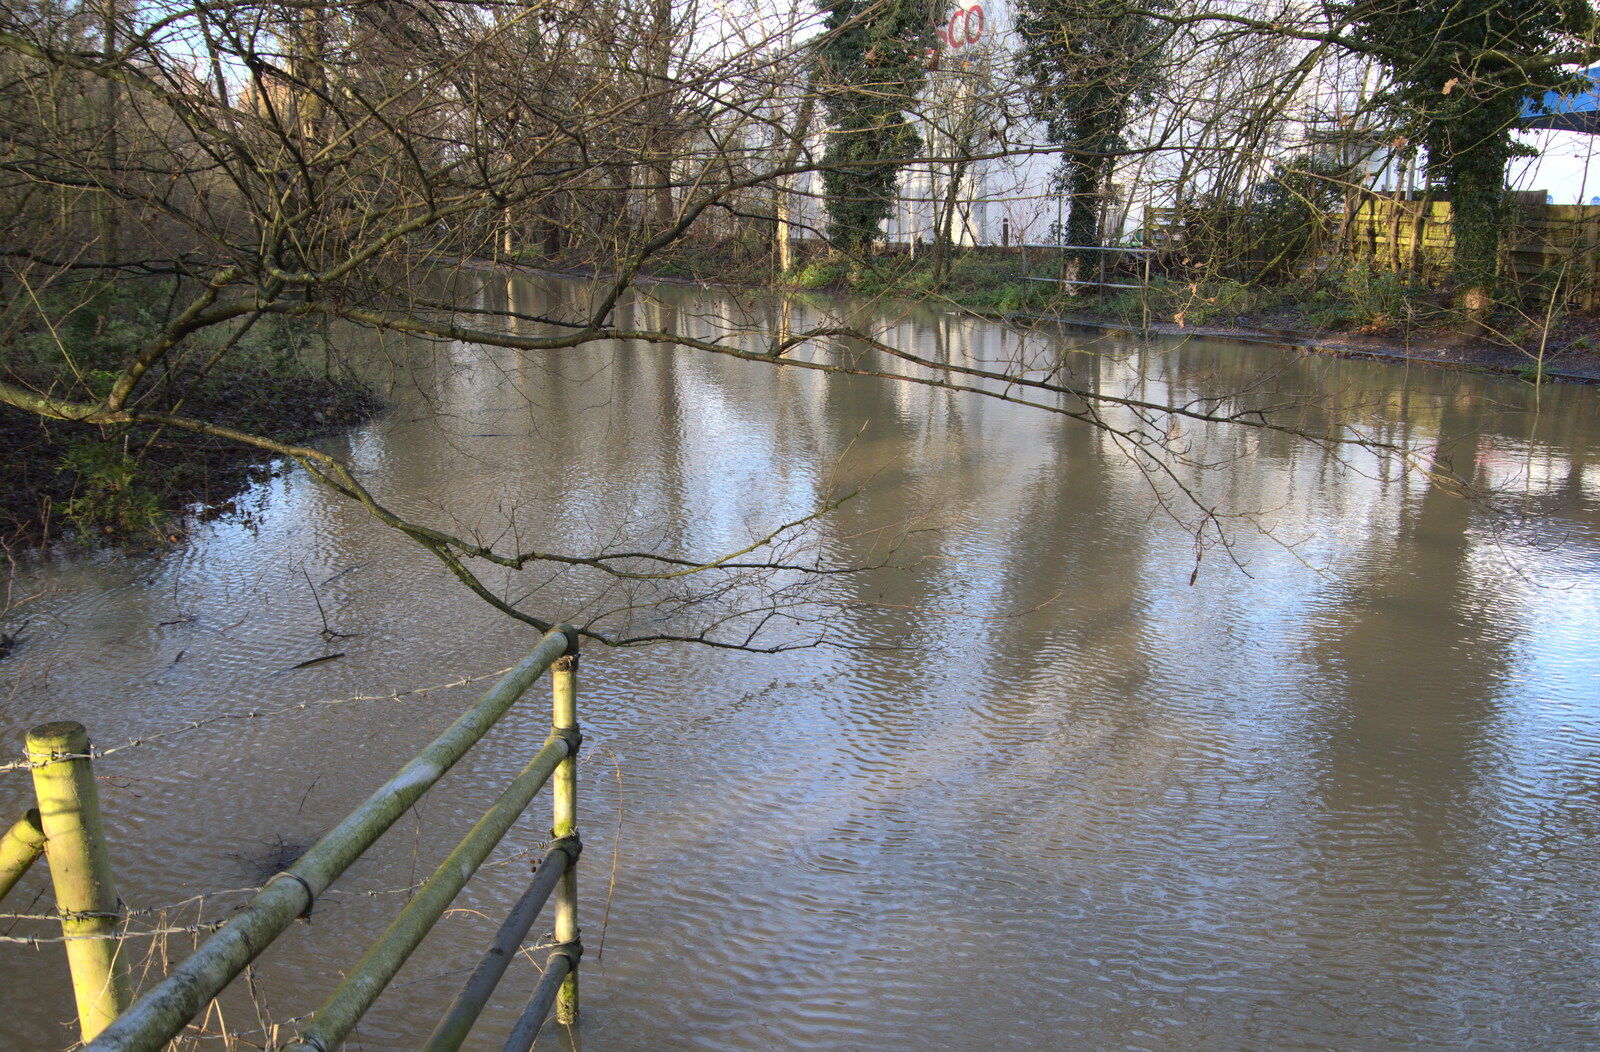 The Waveney has predictably flooded near the Lows from The Christmas Eve Floods, Diss, Norfolk - 24th December 2020